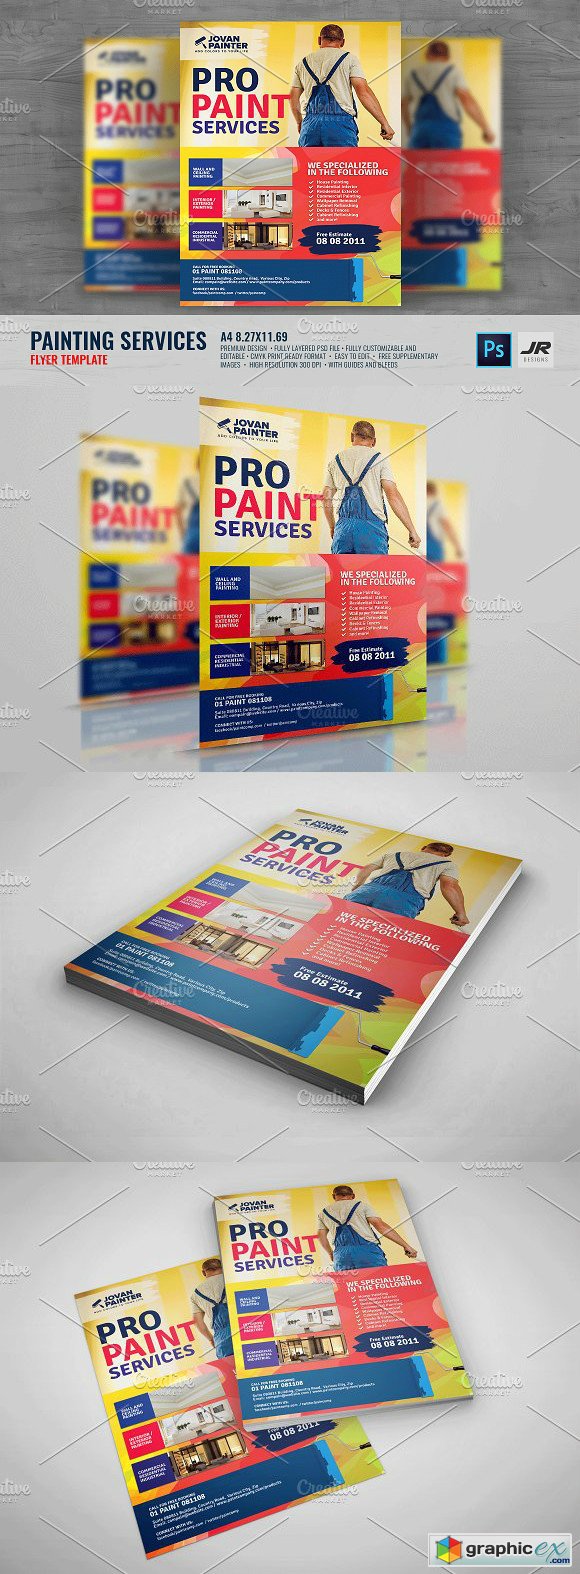 Paint Painting Services